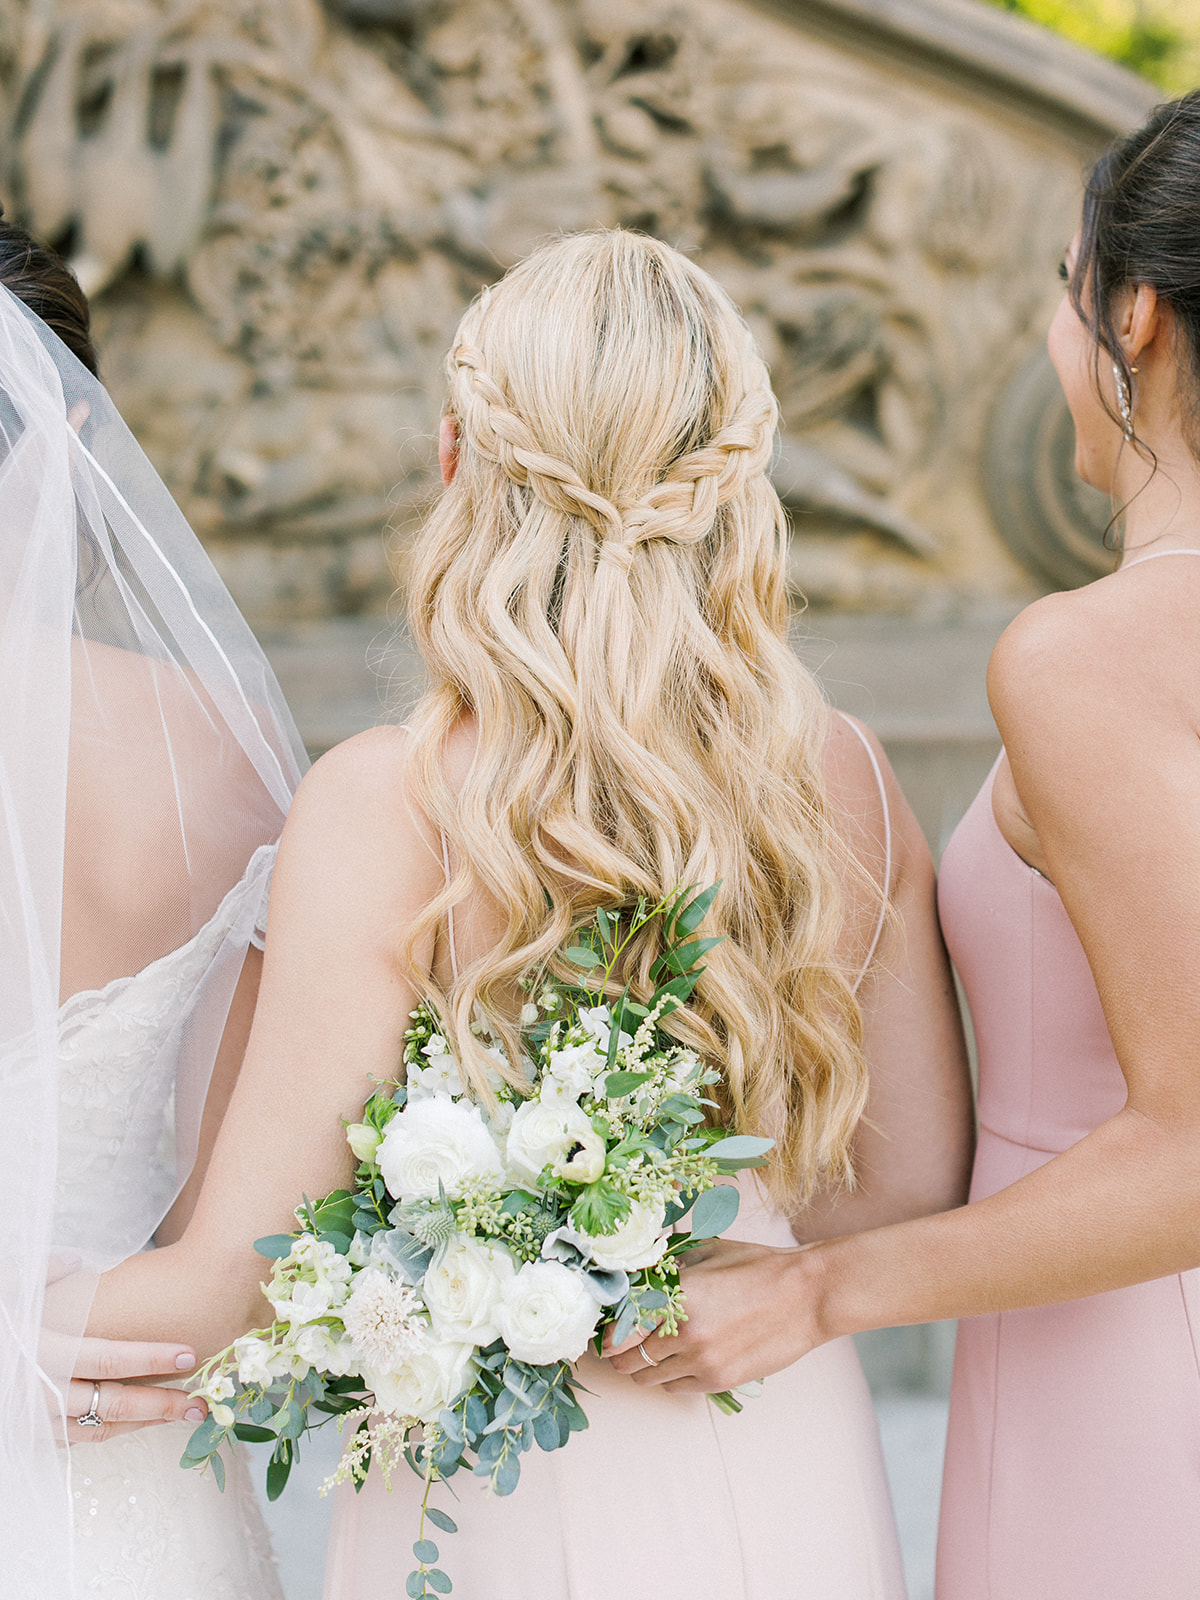 Bridesmaid with blonde hair styled with waves and cool braid detail